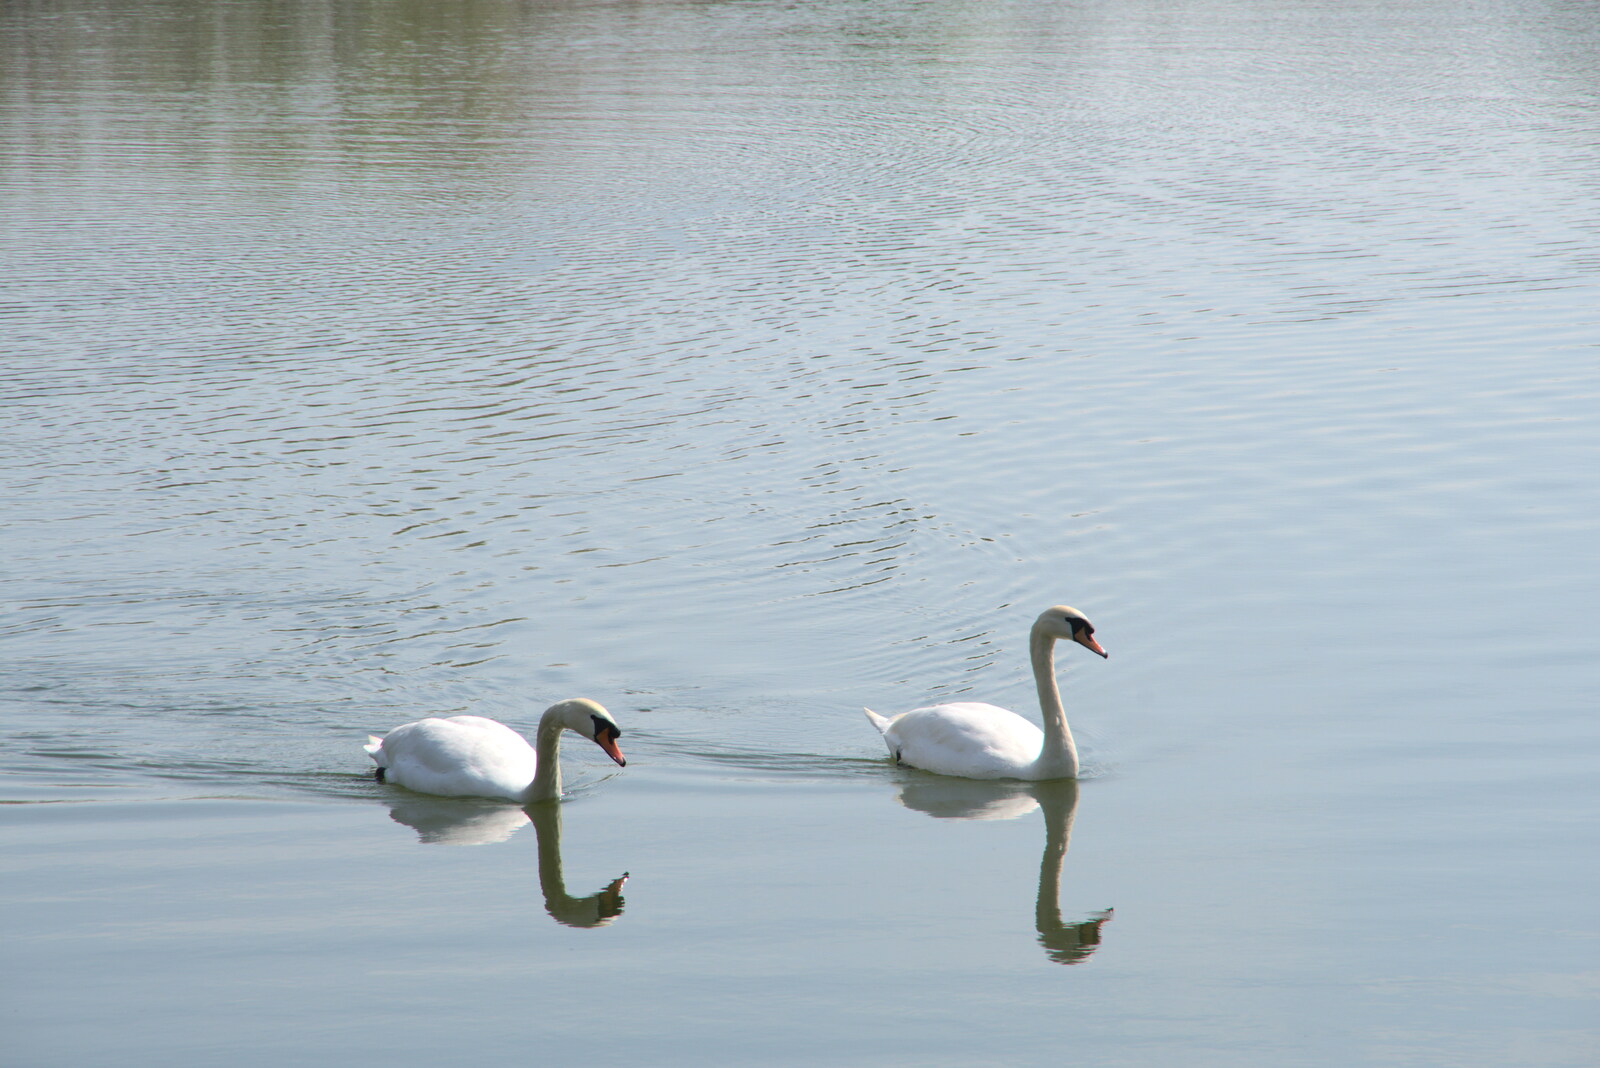 The two swans float by, reflected in the water from A Weekend Camping Trip in the Garden, Brome, Suffolk - 11th April 2020